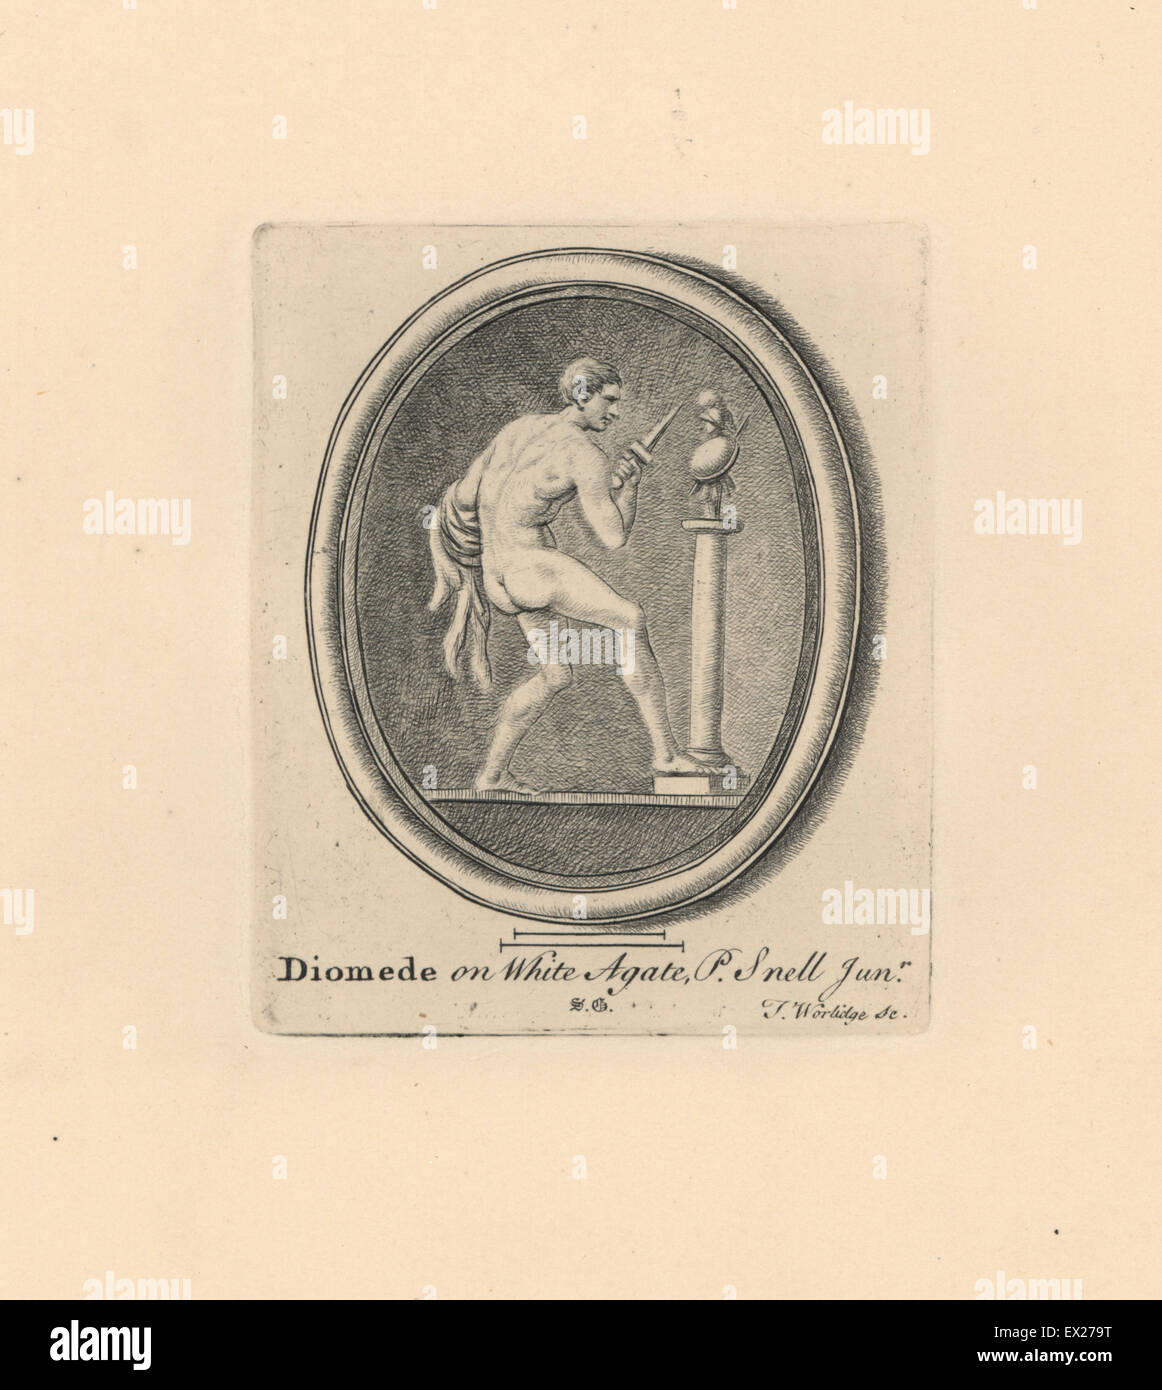 Portrait of Diomedes, warrior hero in Homer's Iliad, with small sword and cloak before a statue, on white agate in the collection of P. Snell Jr. Copperplate engraving by Thomas Worlidge from James Vallentin's One Hundred and Eight Engravings from Antique Gems, 1863. Stock Photo